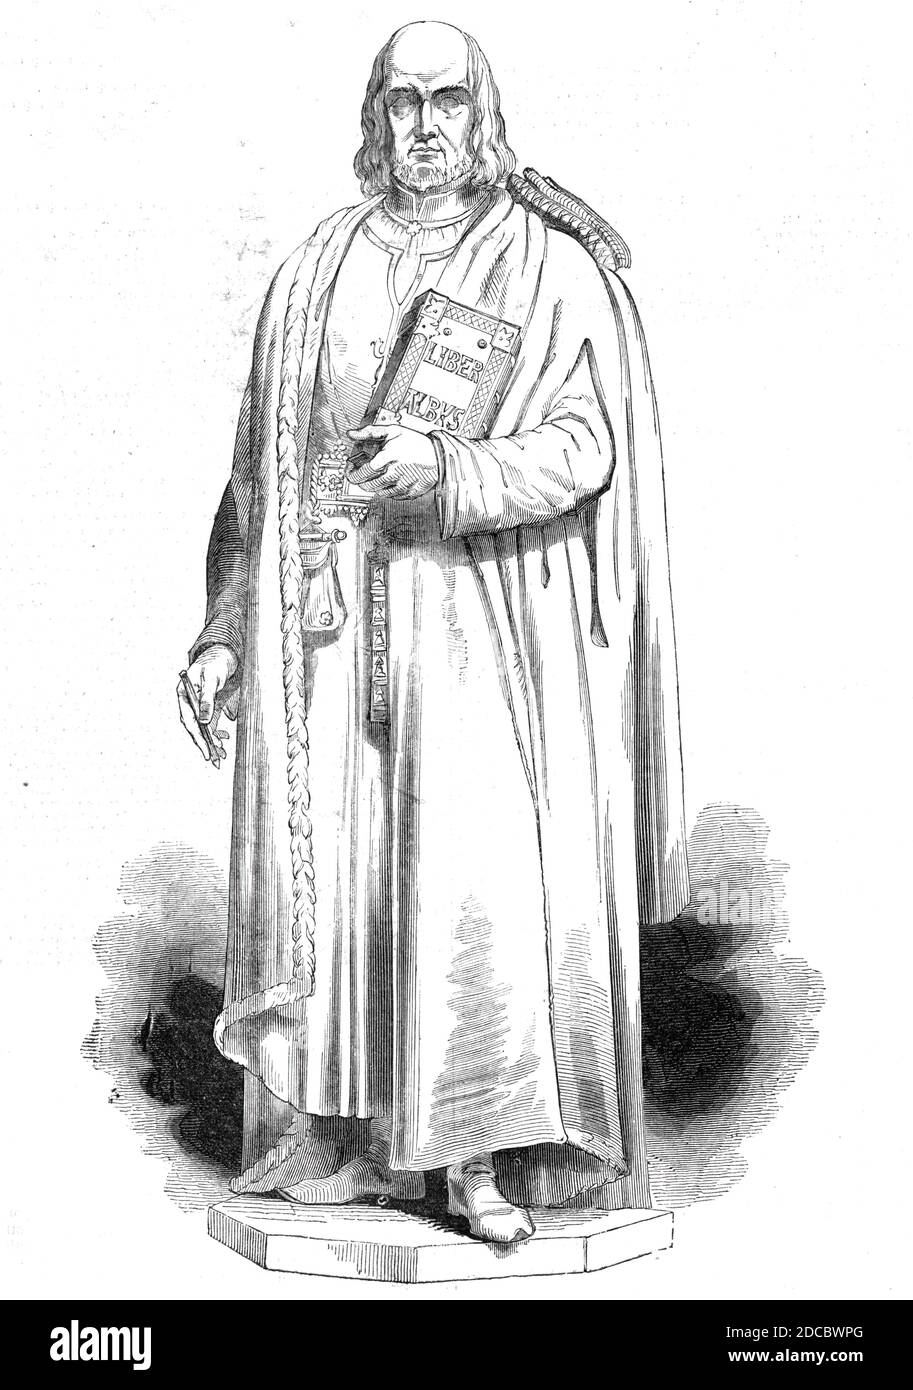 Statue of John Carpenter, at the City of London School, 1844. Sculpture of John Carpenter (c1372-1442), founder of the City of London School for boys, by Samuel Nixon. 'The statue was suspended immediately over the pedestal on which it was to stand, and the Lord Mayor, at the request of Mr. Nixon, the sculptor, prepared the pedestal for its reception by spreading some mortar on the top of it. The statue was then lowered and adjusted into its proper position, and the tackling and covering were removed, so as to expose it to the full observation of the company assembled'. From &quot;Illustrated Stock Photo